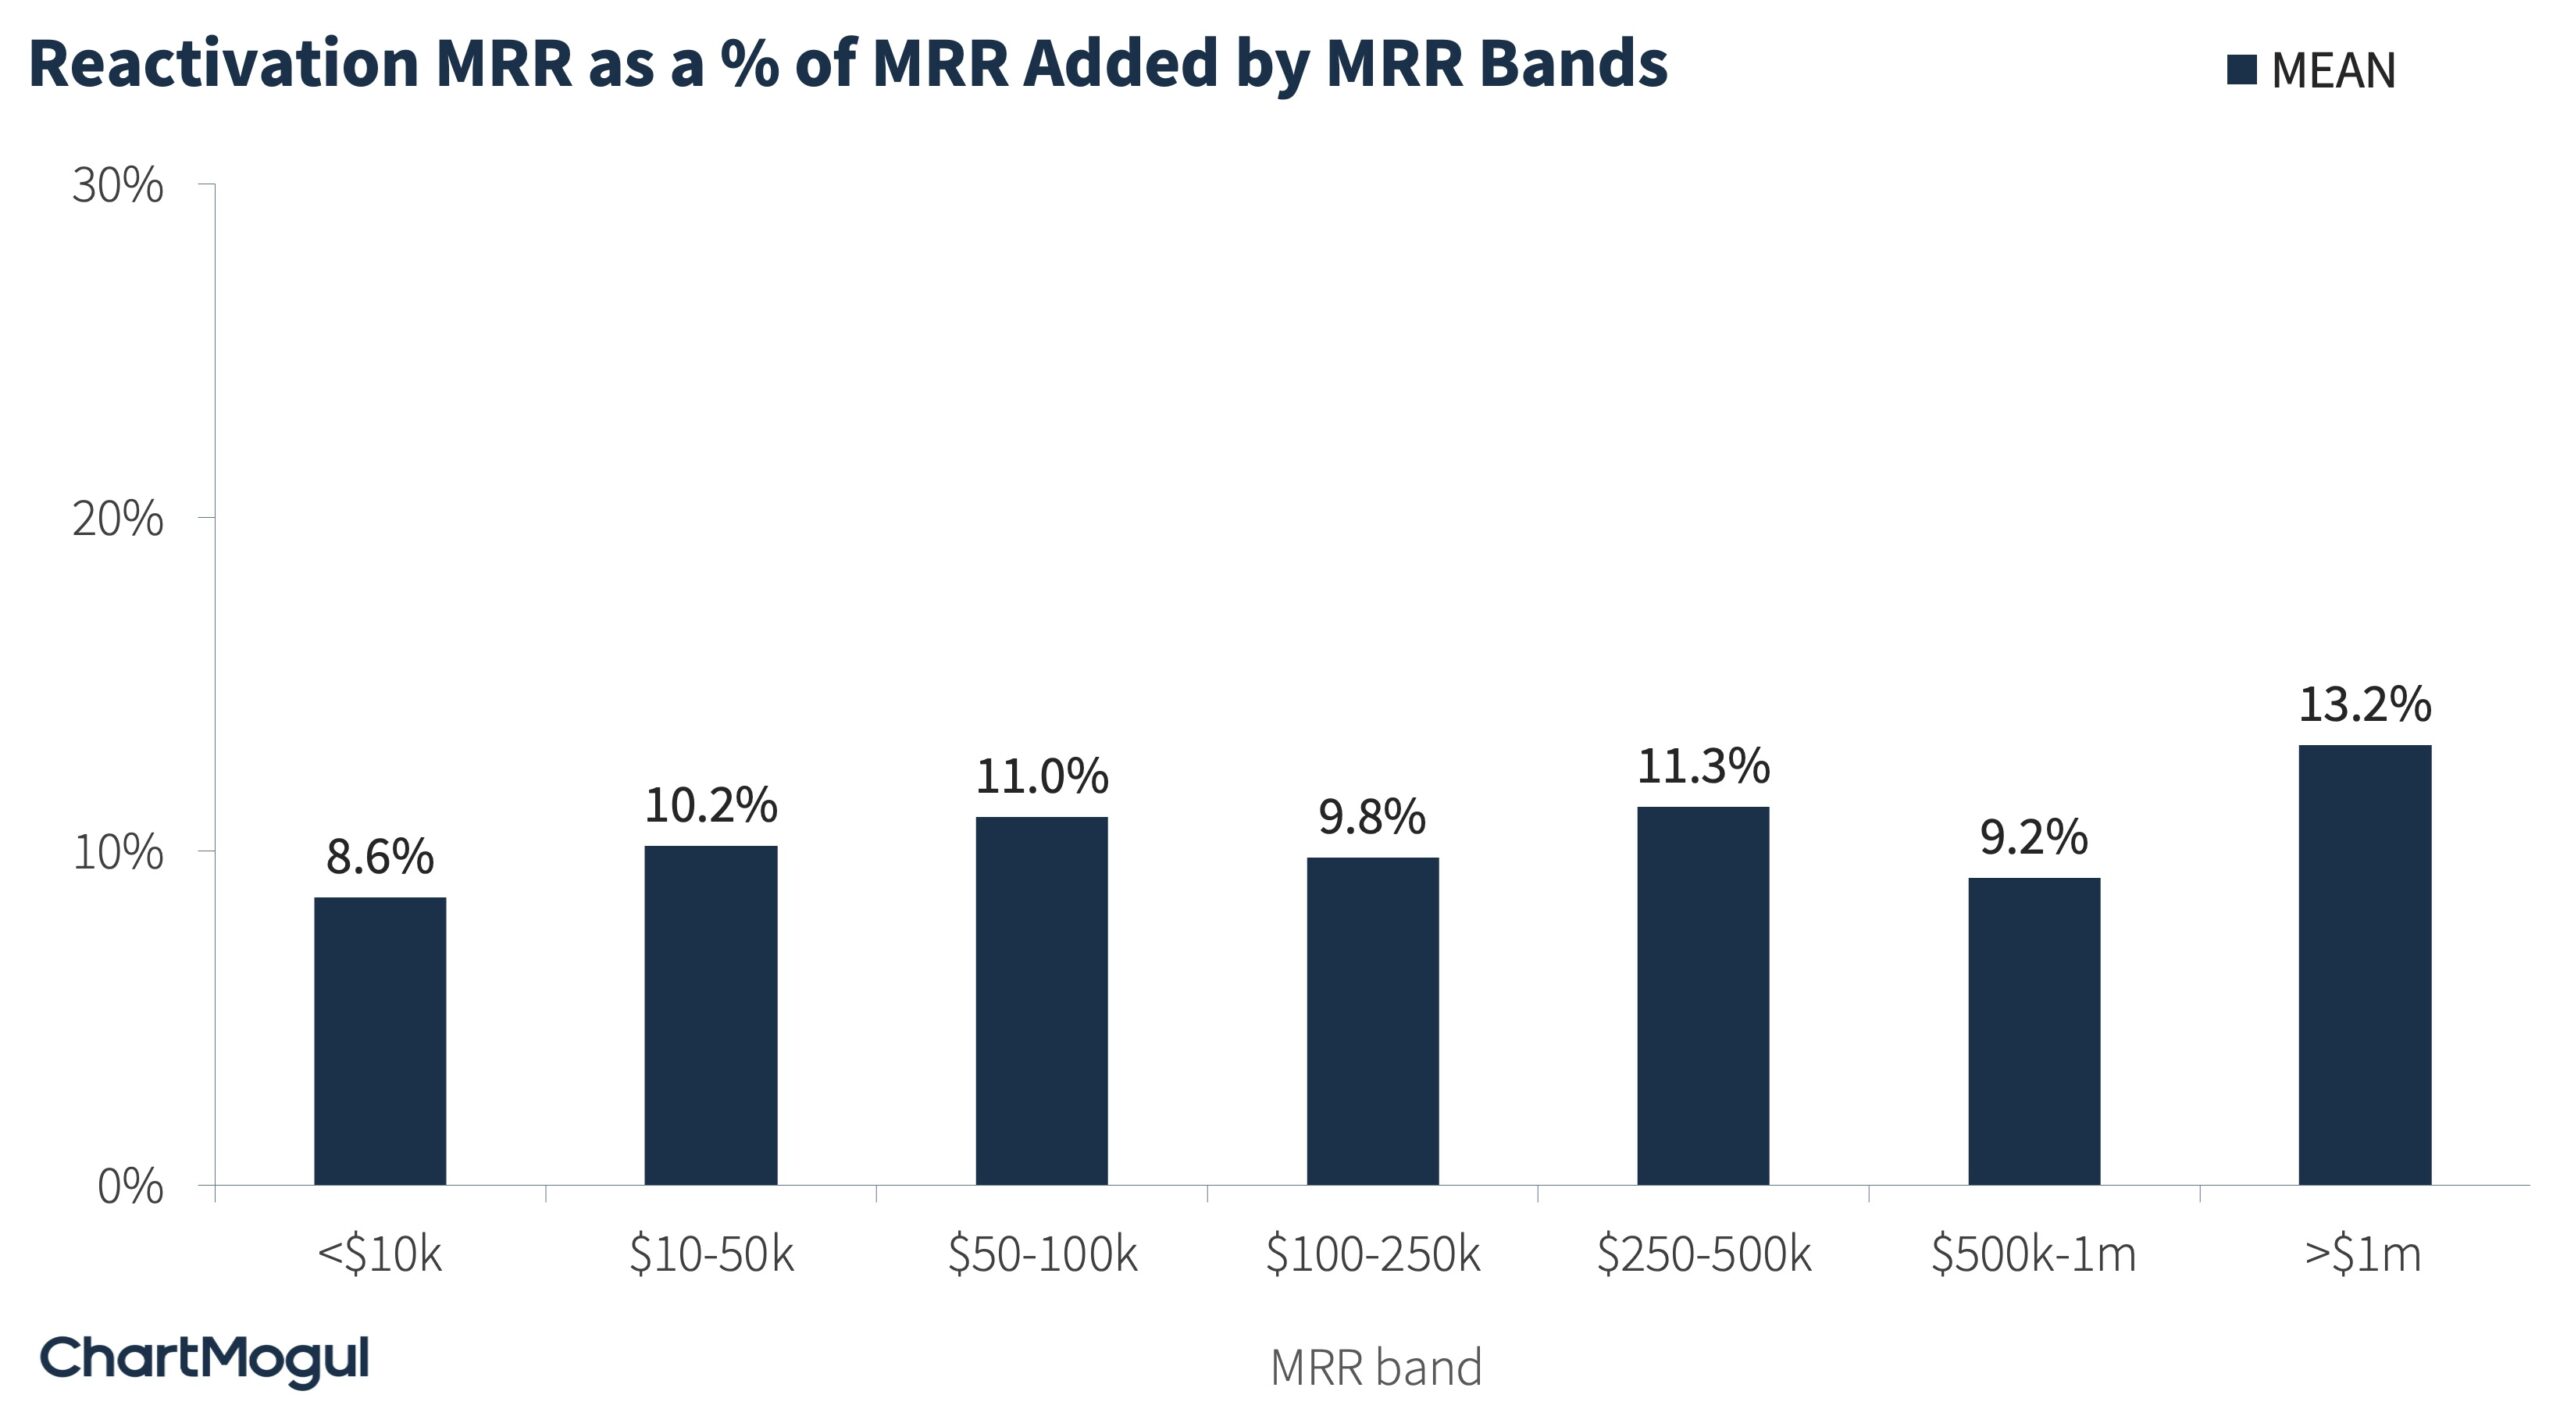 Reactivation MRR as a % of MRR Added